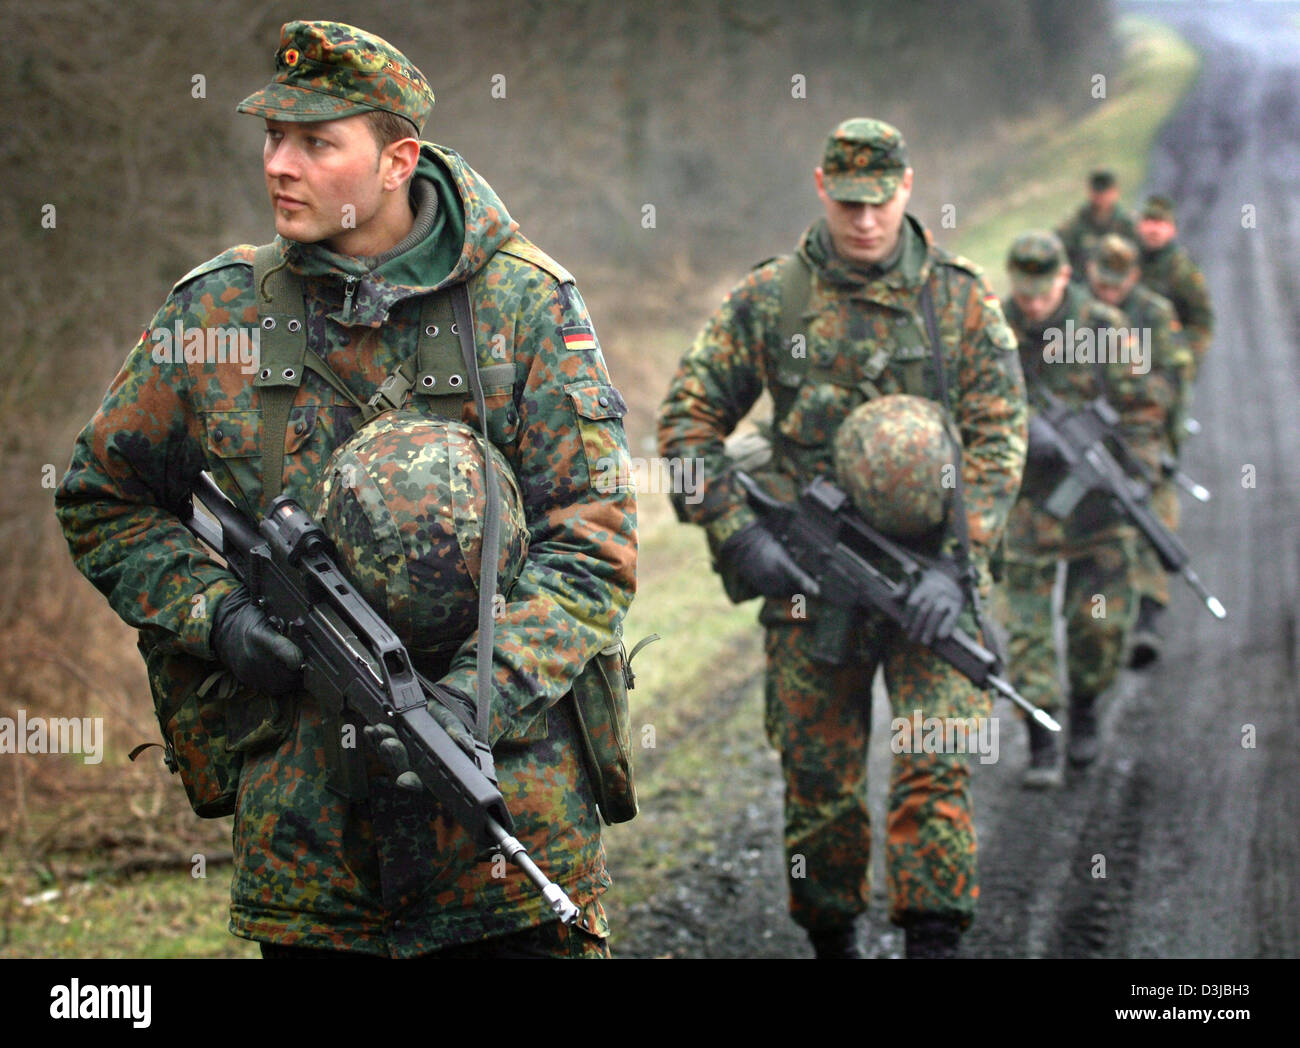 dpa-a-group-of-recruits-of-the-german-bundeswehr-army-carry-type-g-D3JBH3.jpg